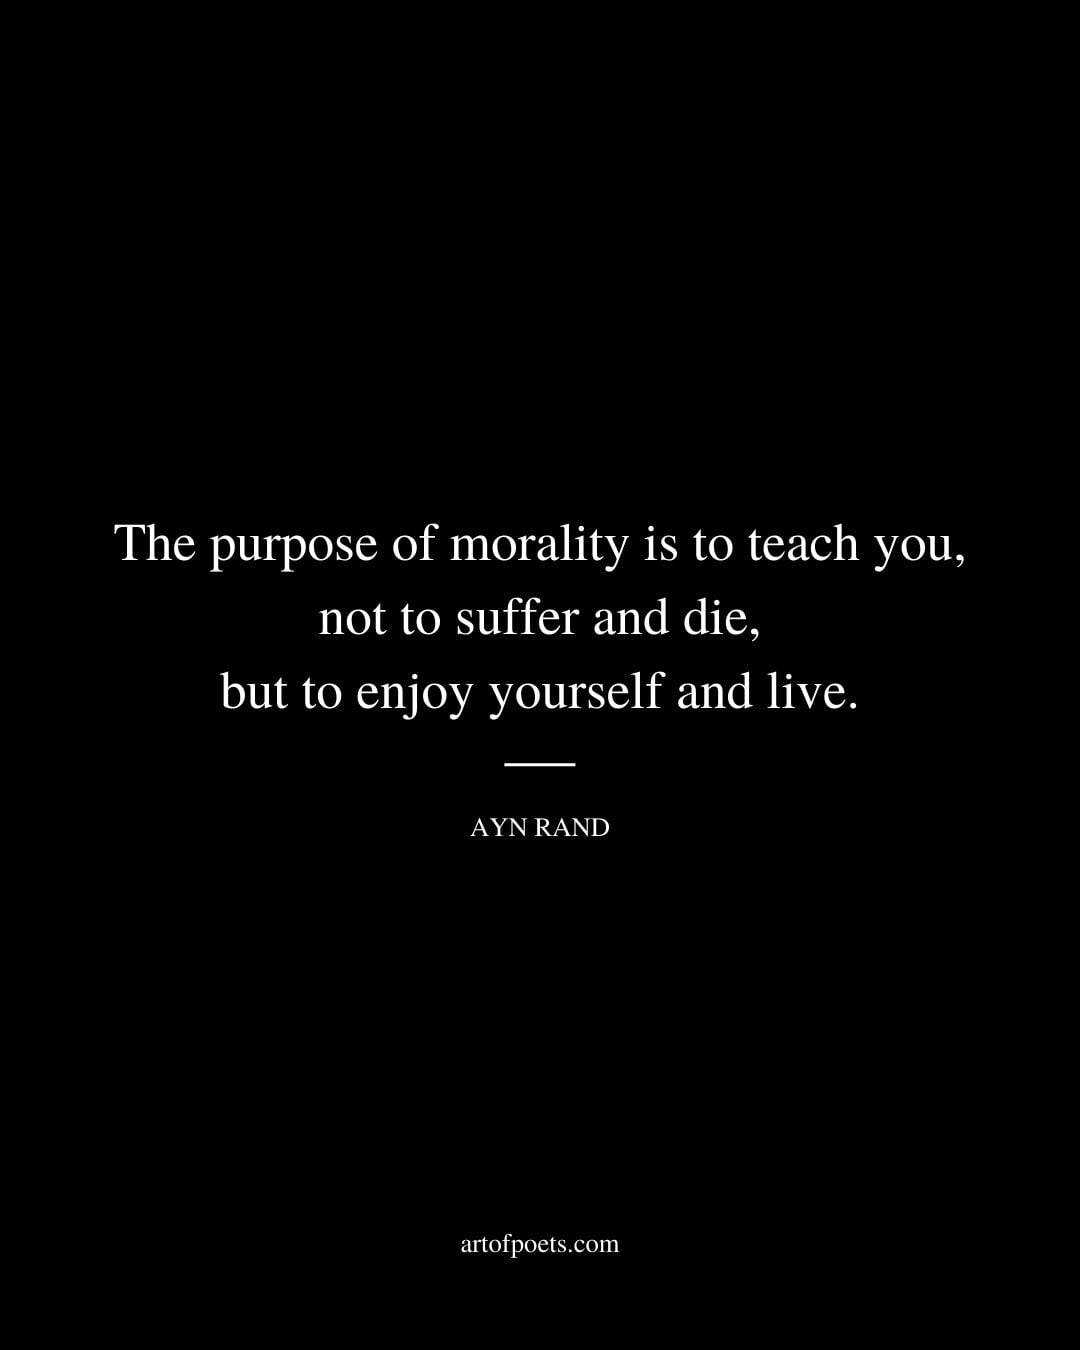 The purpose of morality is to teach you not to suffer and die but to enjoy yourself and live